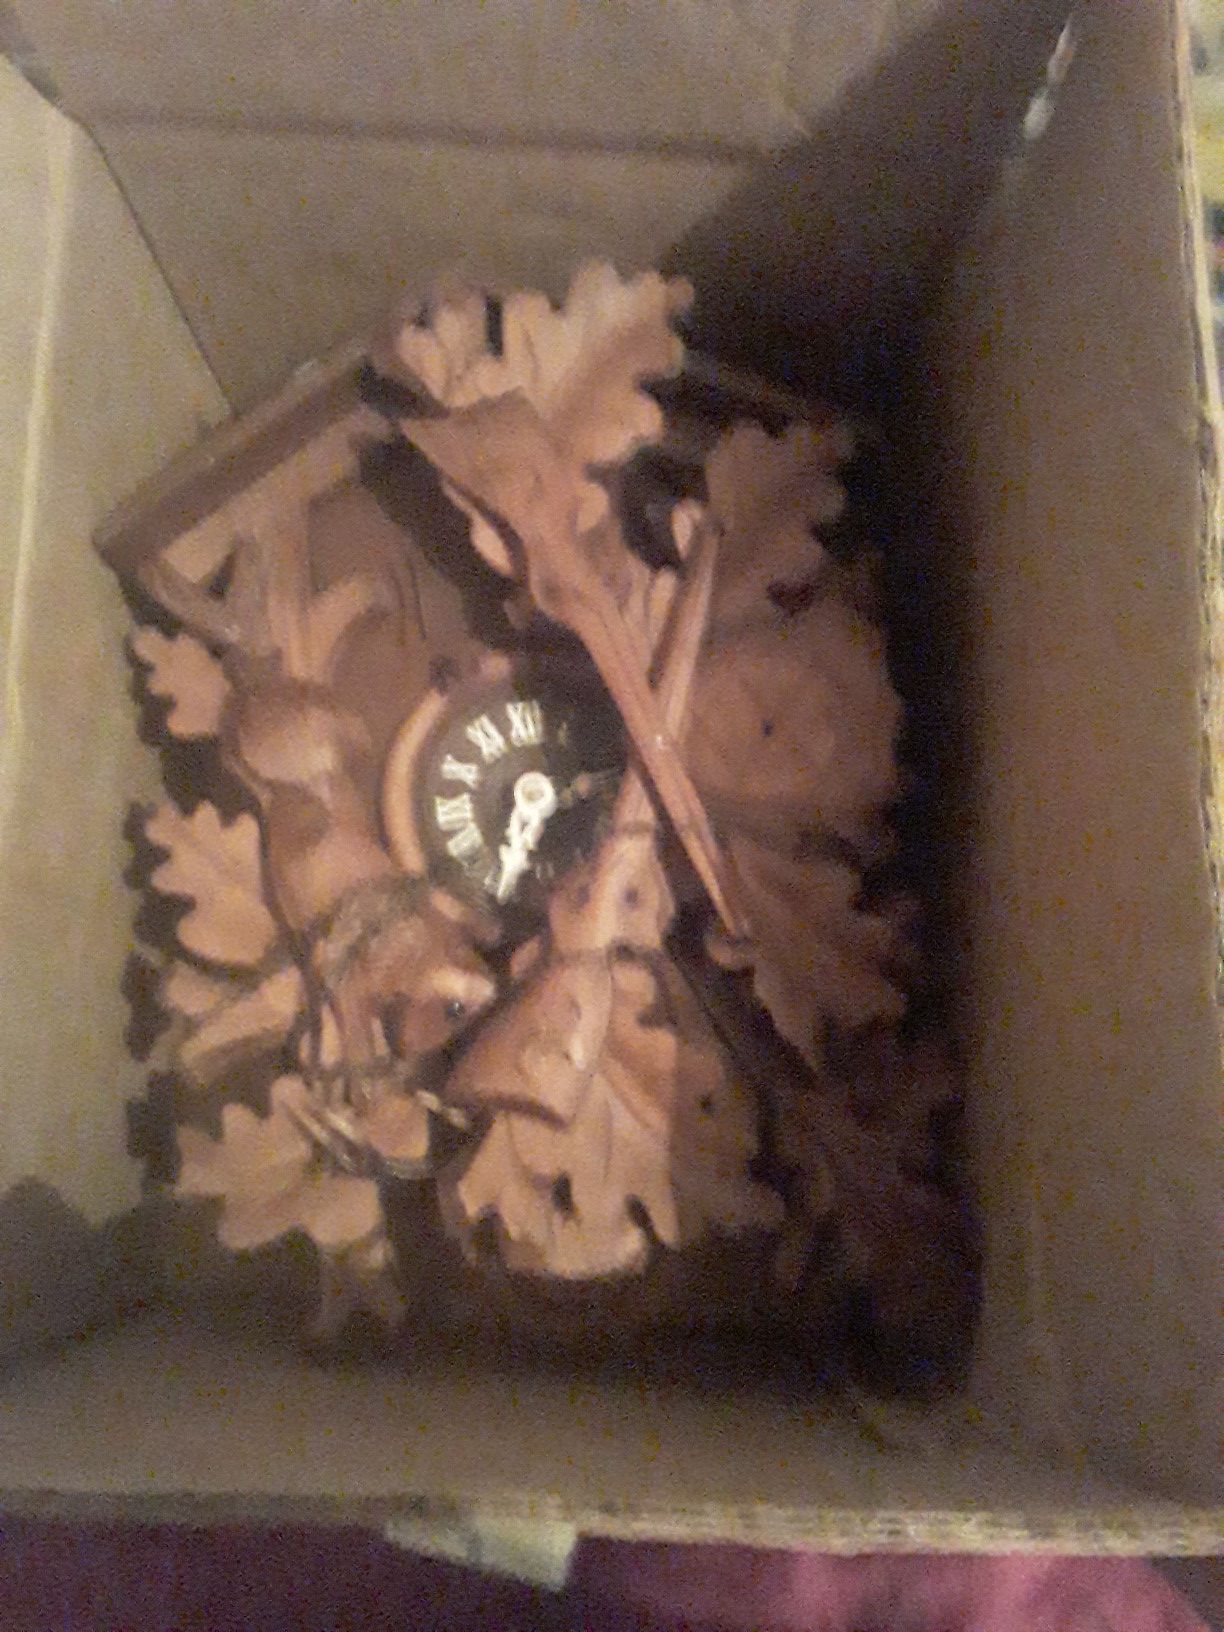 antique coocoo clock in original box with directions still need to put togeather